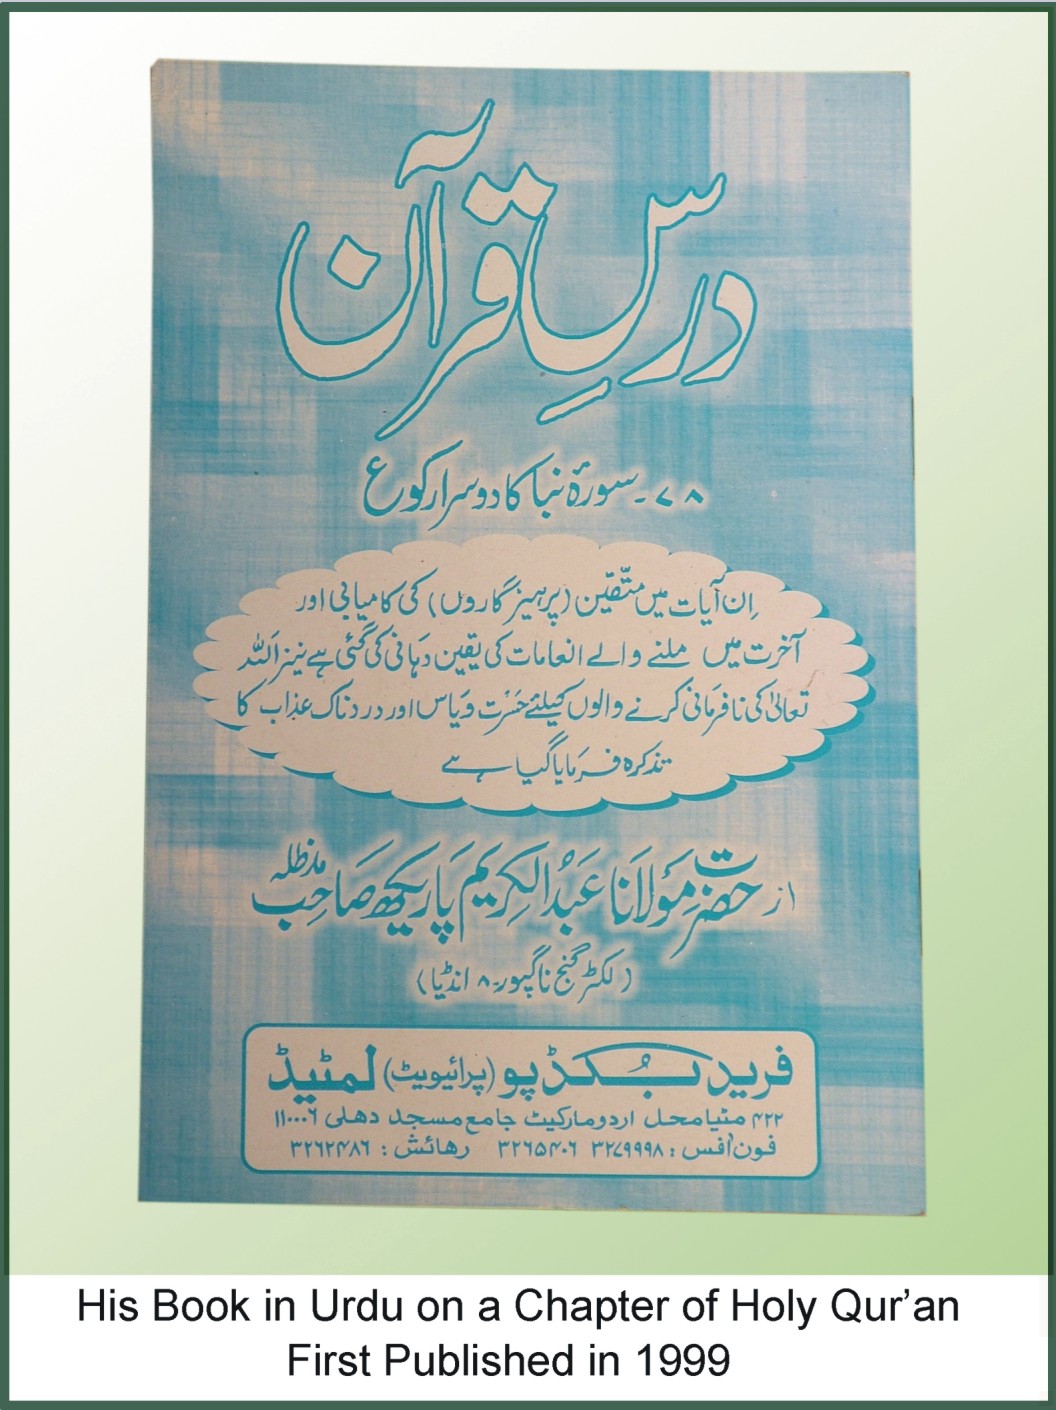 A Chaptor of The Holy Qur'an (Urdu) First Published in 1999